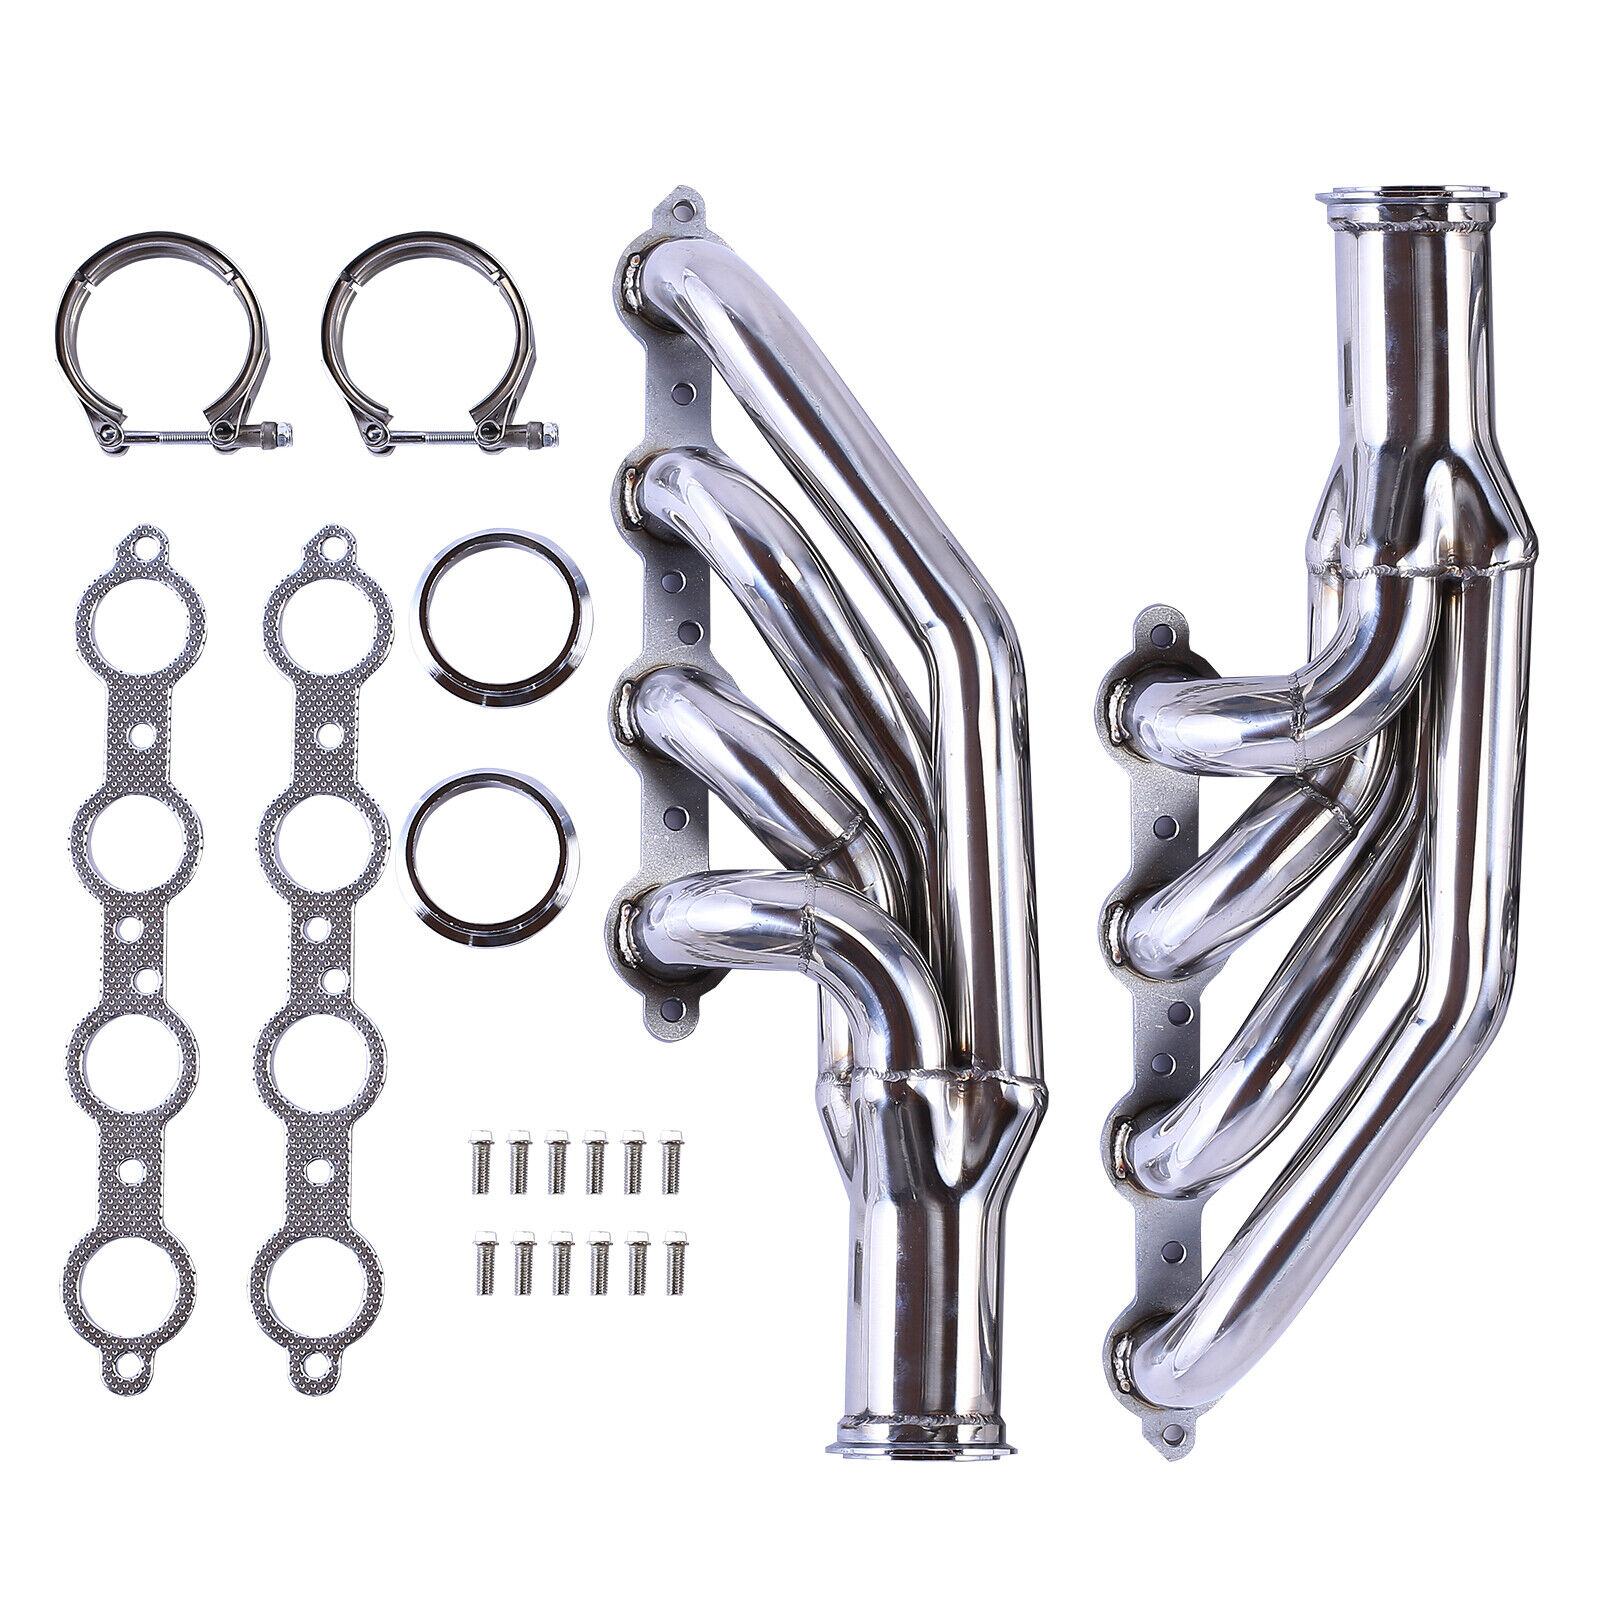 For LS1 LS6 LSX GM V8 Chevy Up & Forward Turbo Manifold Exhaust Header Manifold